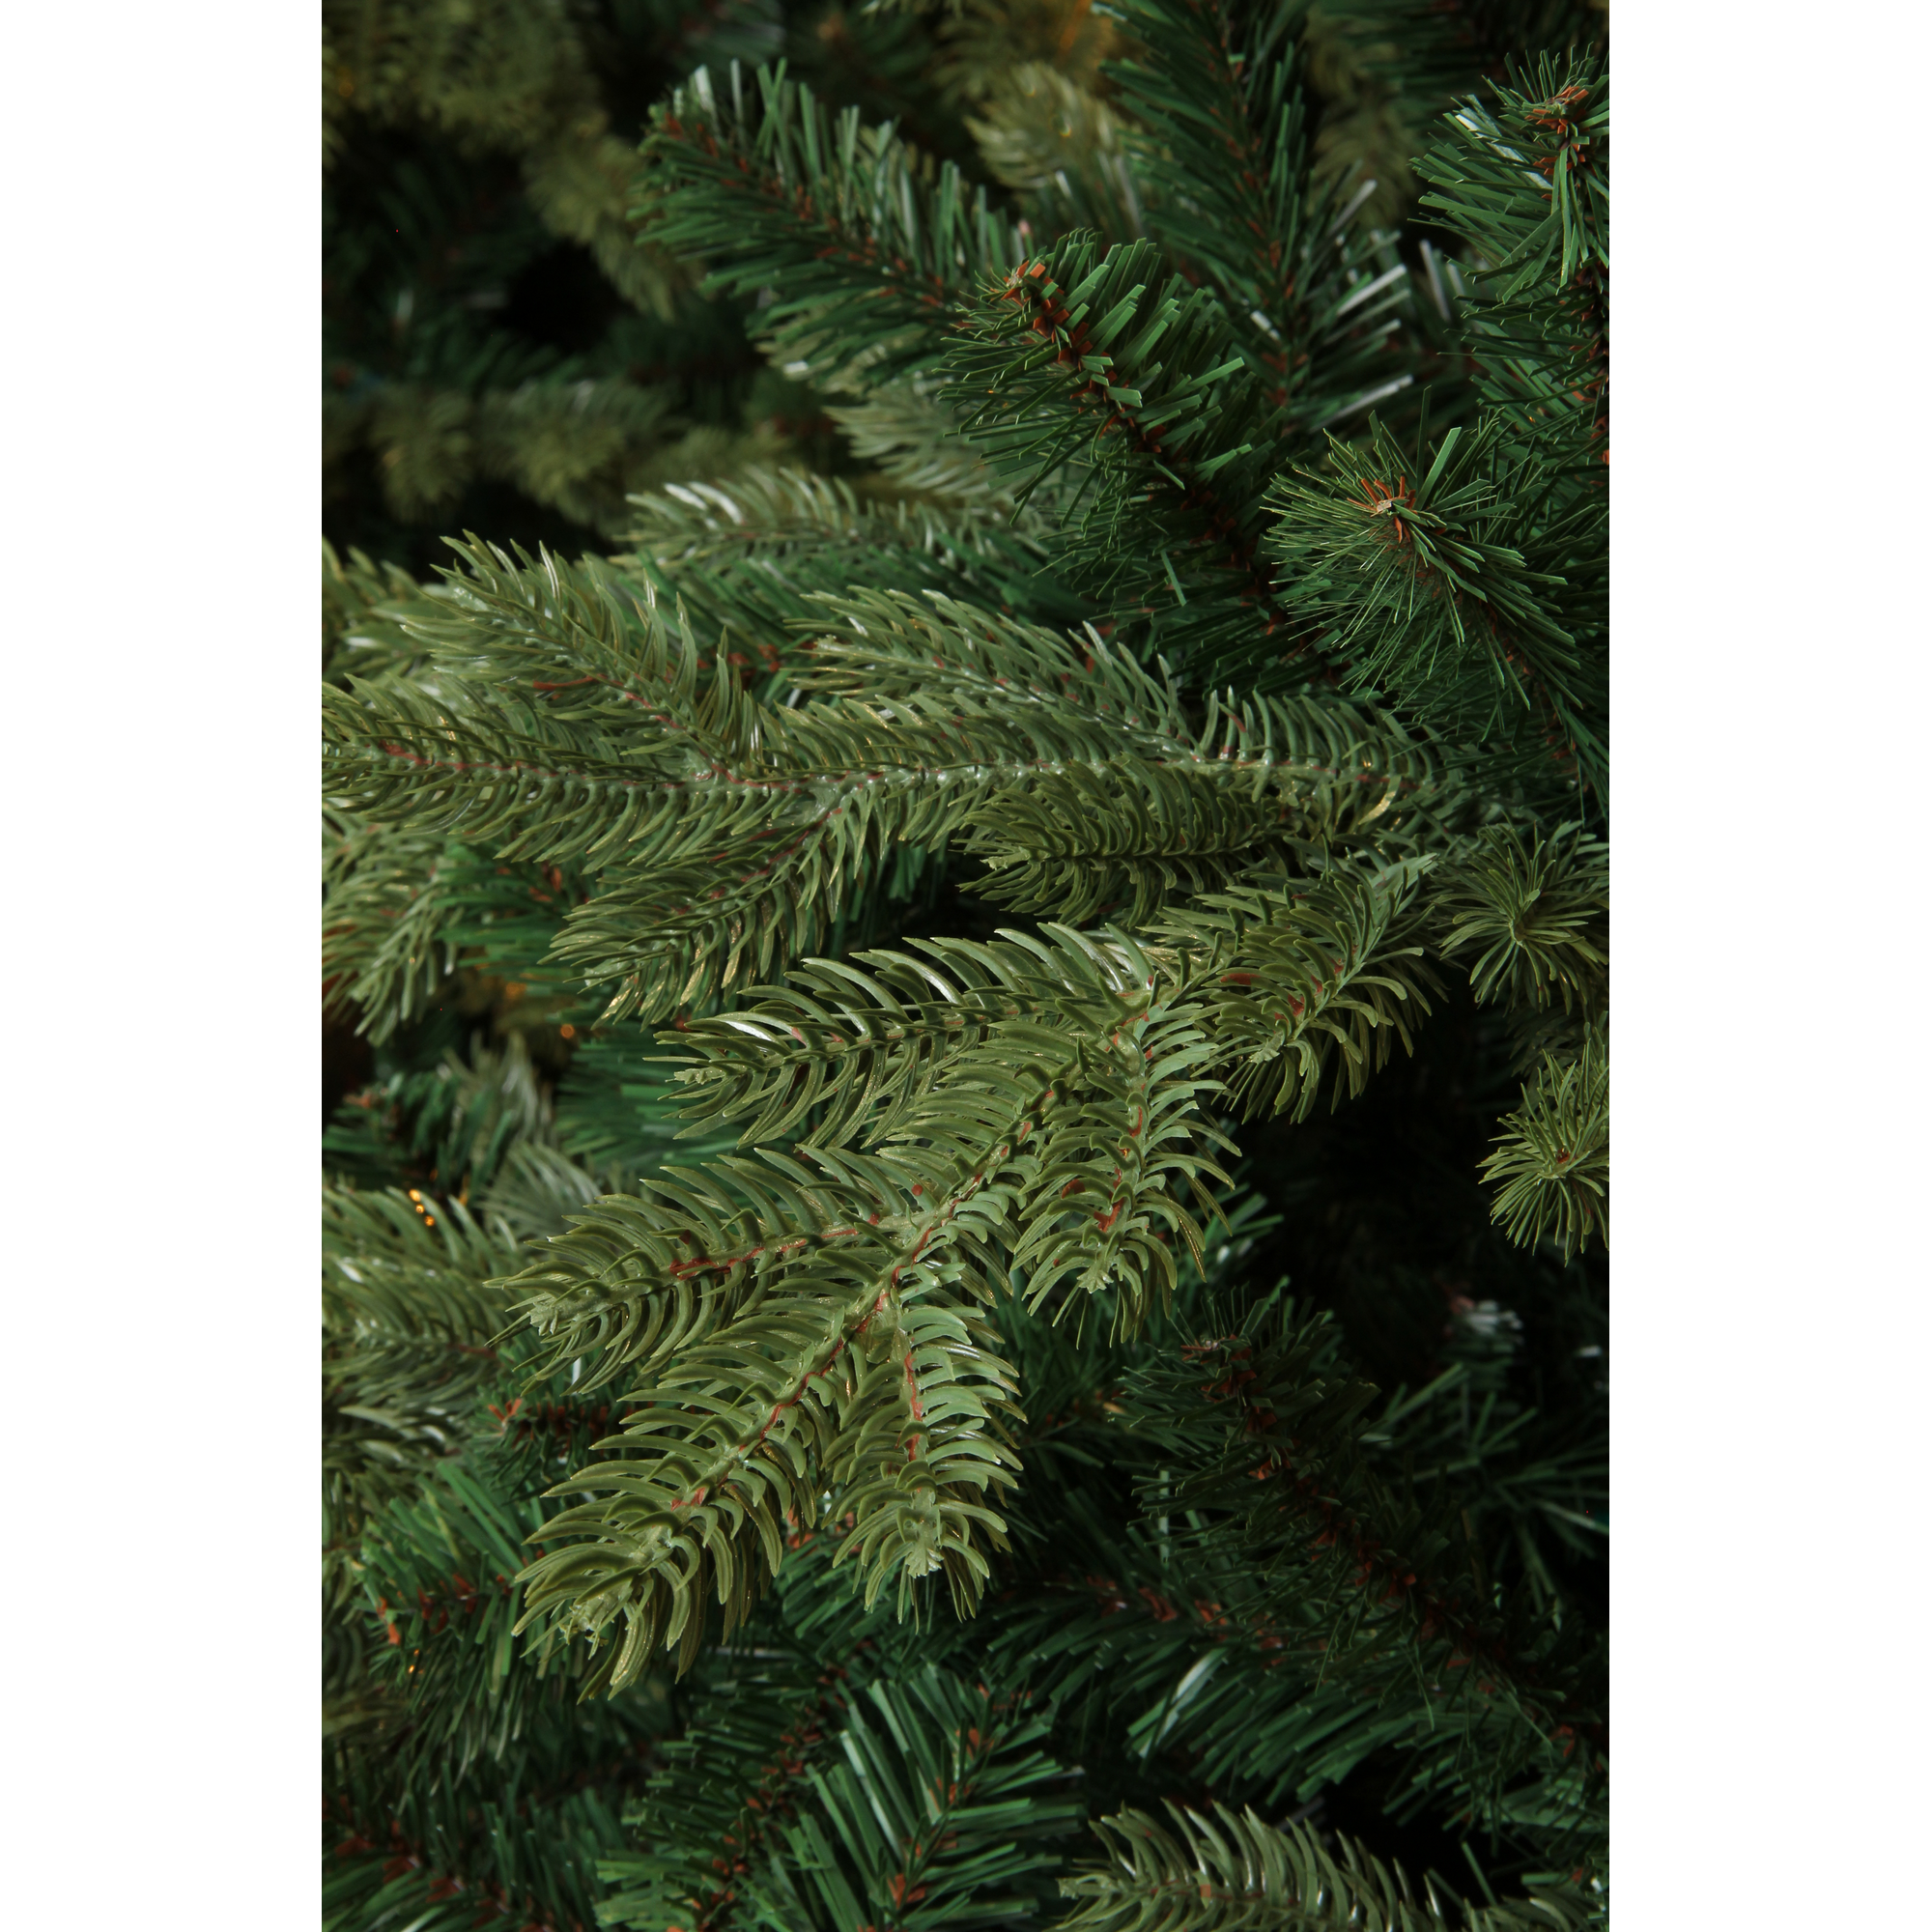 Weihnachtsbaum 'Sherwood' deluxe green 215 cm + product picture